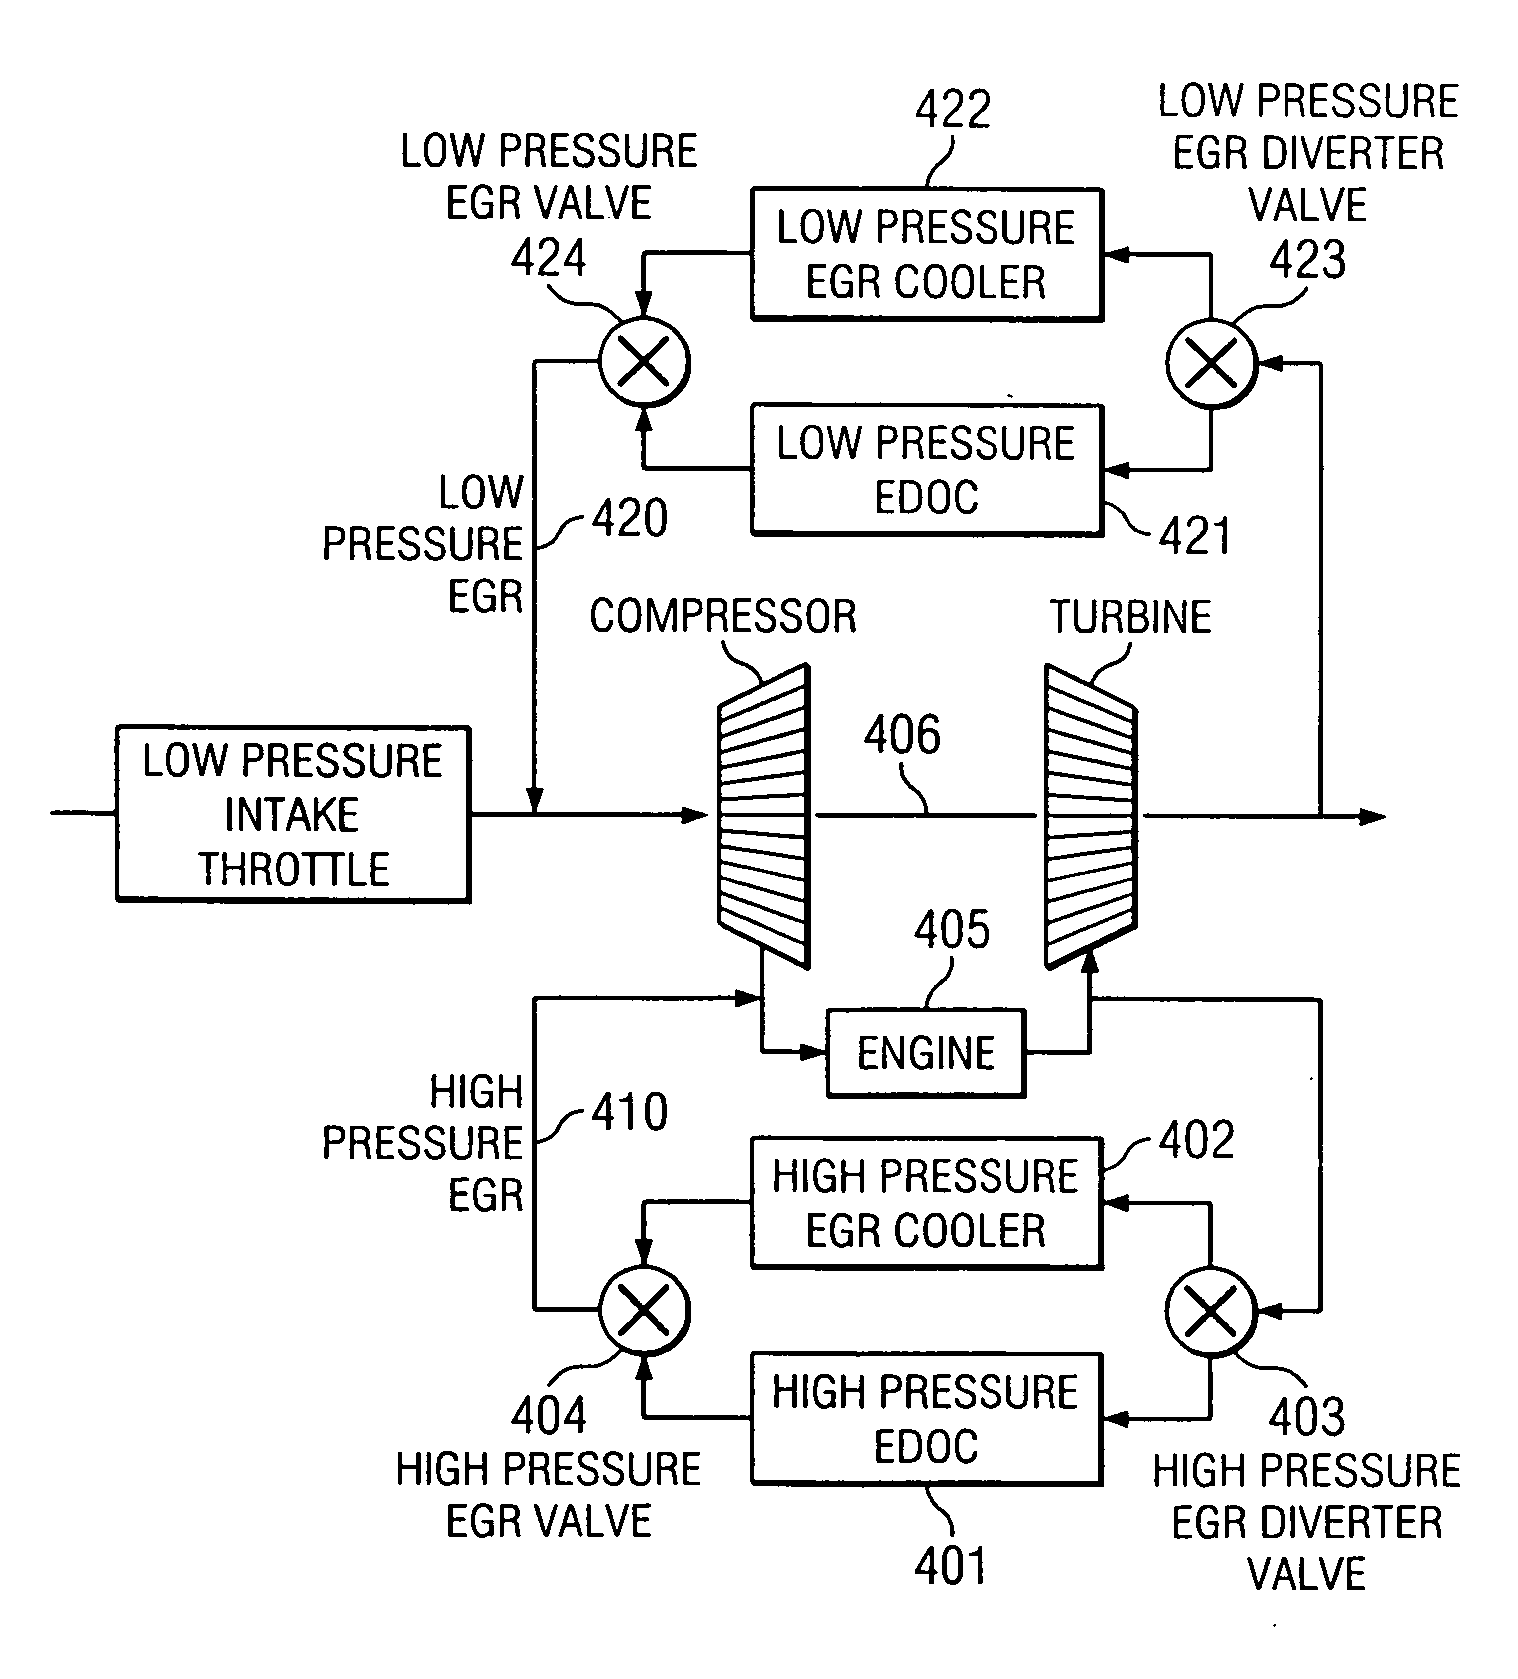 Exhaust gas recirculation system with control of EGR gas temperature